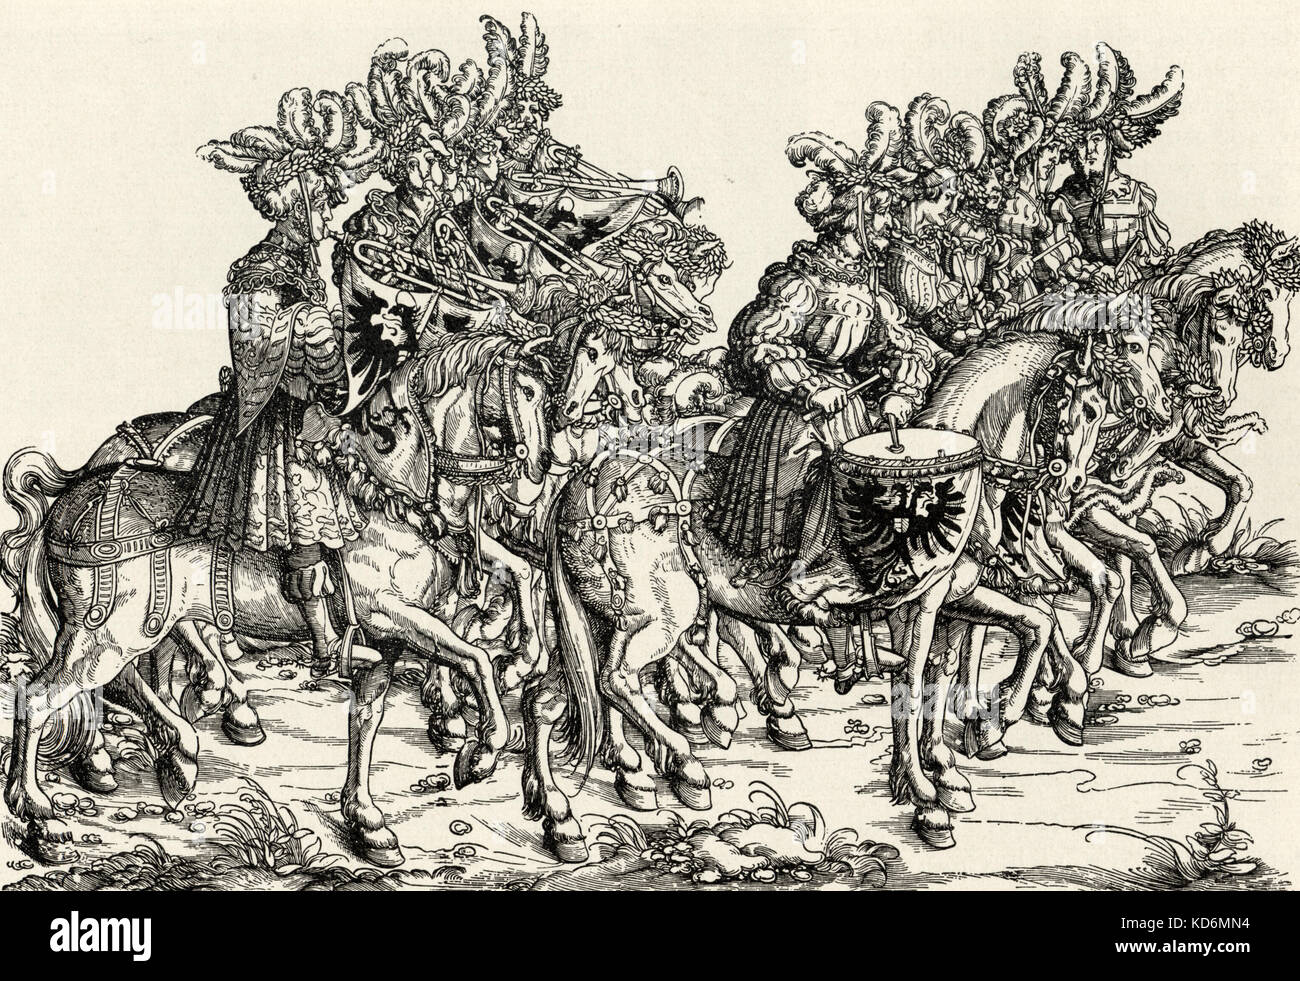 Triumph of Maximilian, c. 1516 - sackbutts and shawms.  Artist - Hans Burgkmair(1473-1531). Military  procession of early music instruments being played. Stock Photo